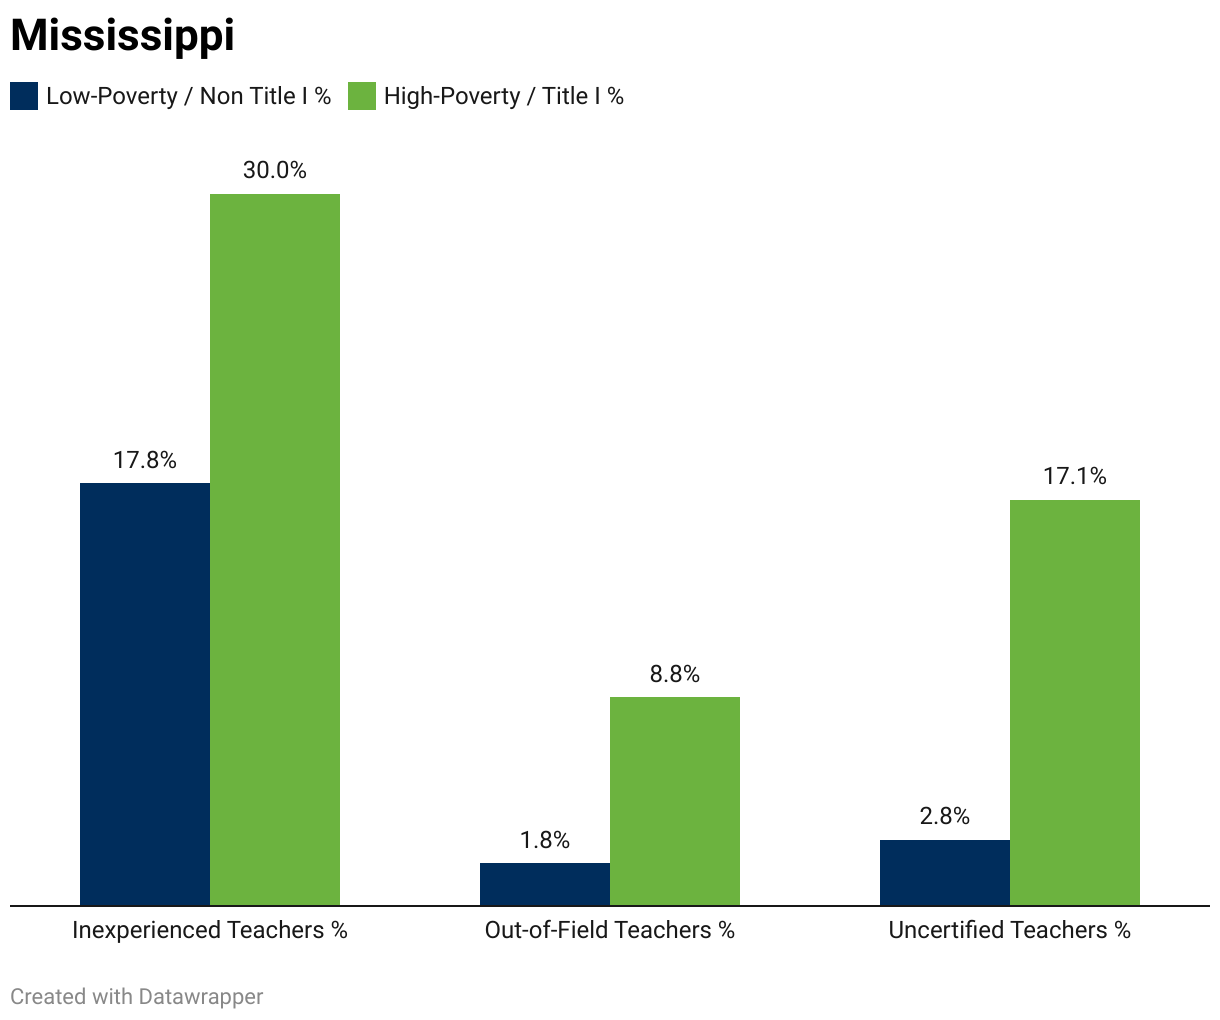 A grouped column chart showing the percentage of inexperienced, out-of-field and uncertified teachers in low-poverty non-Title I schools vs. higher-poverty Title I schools IN MISSISSIPPI.